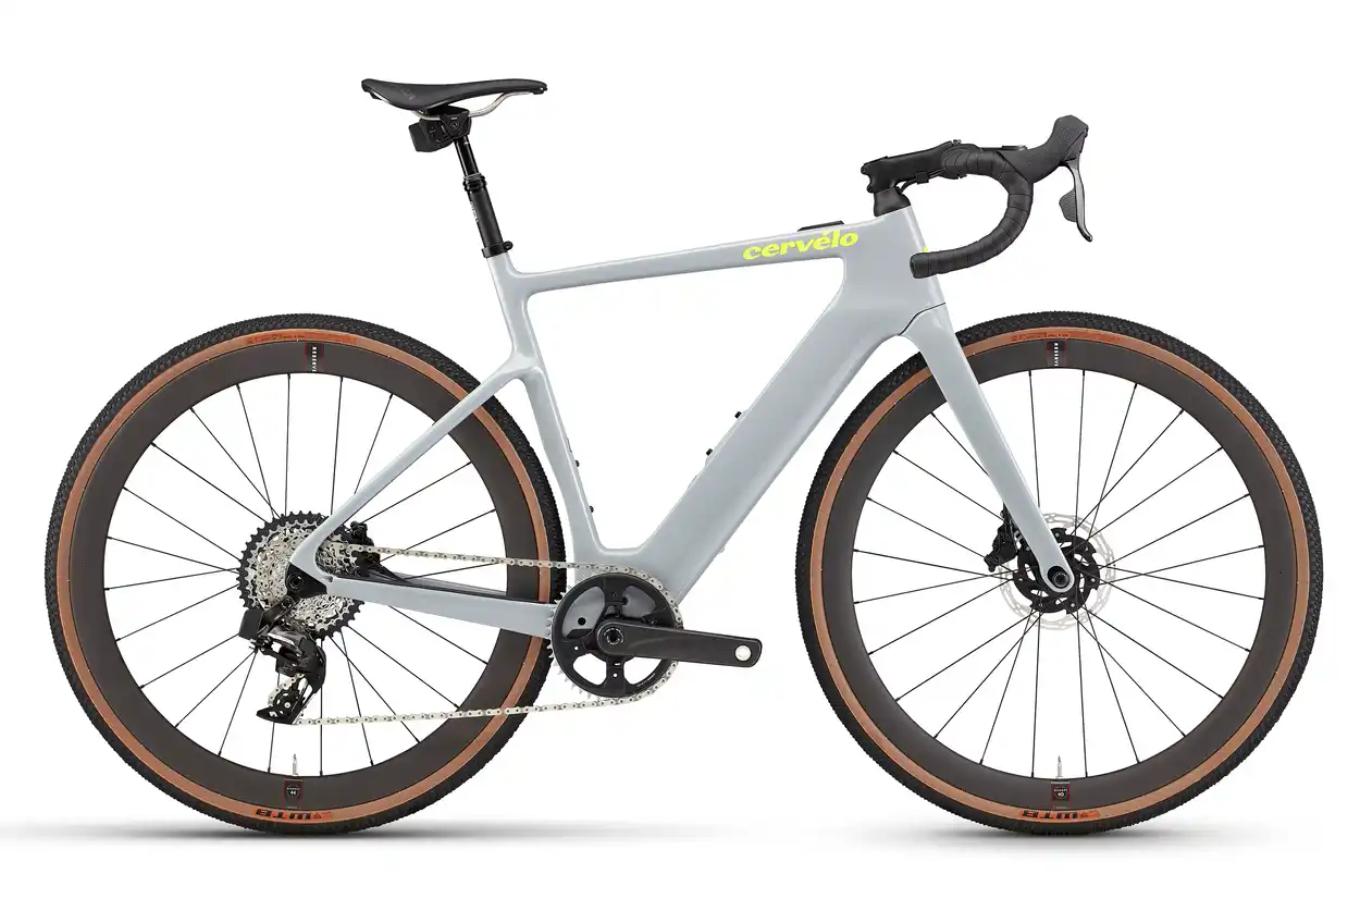 Cervélo also offer the Rouvida with builds tailored for technical gravel riding with the inclusion of a dropper post